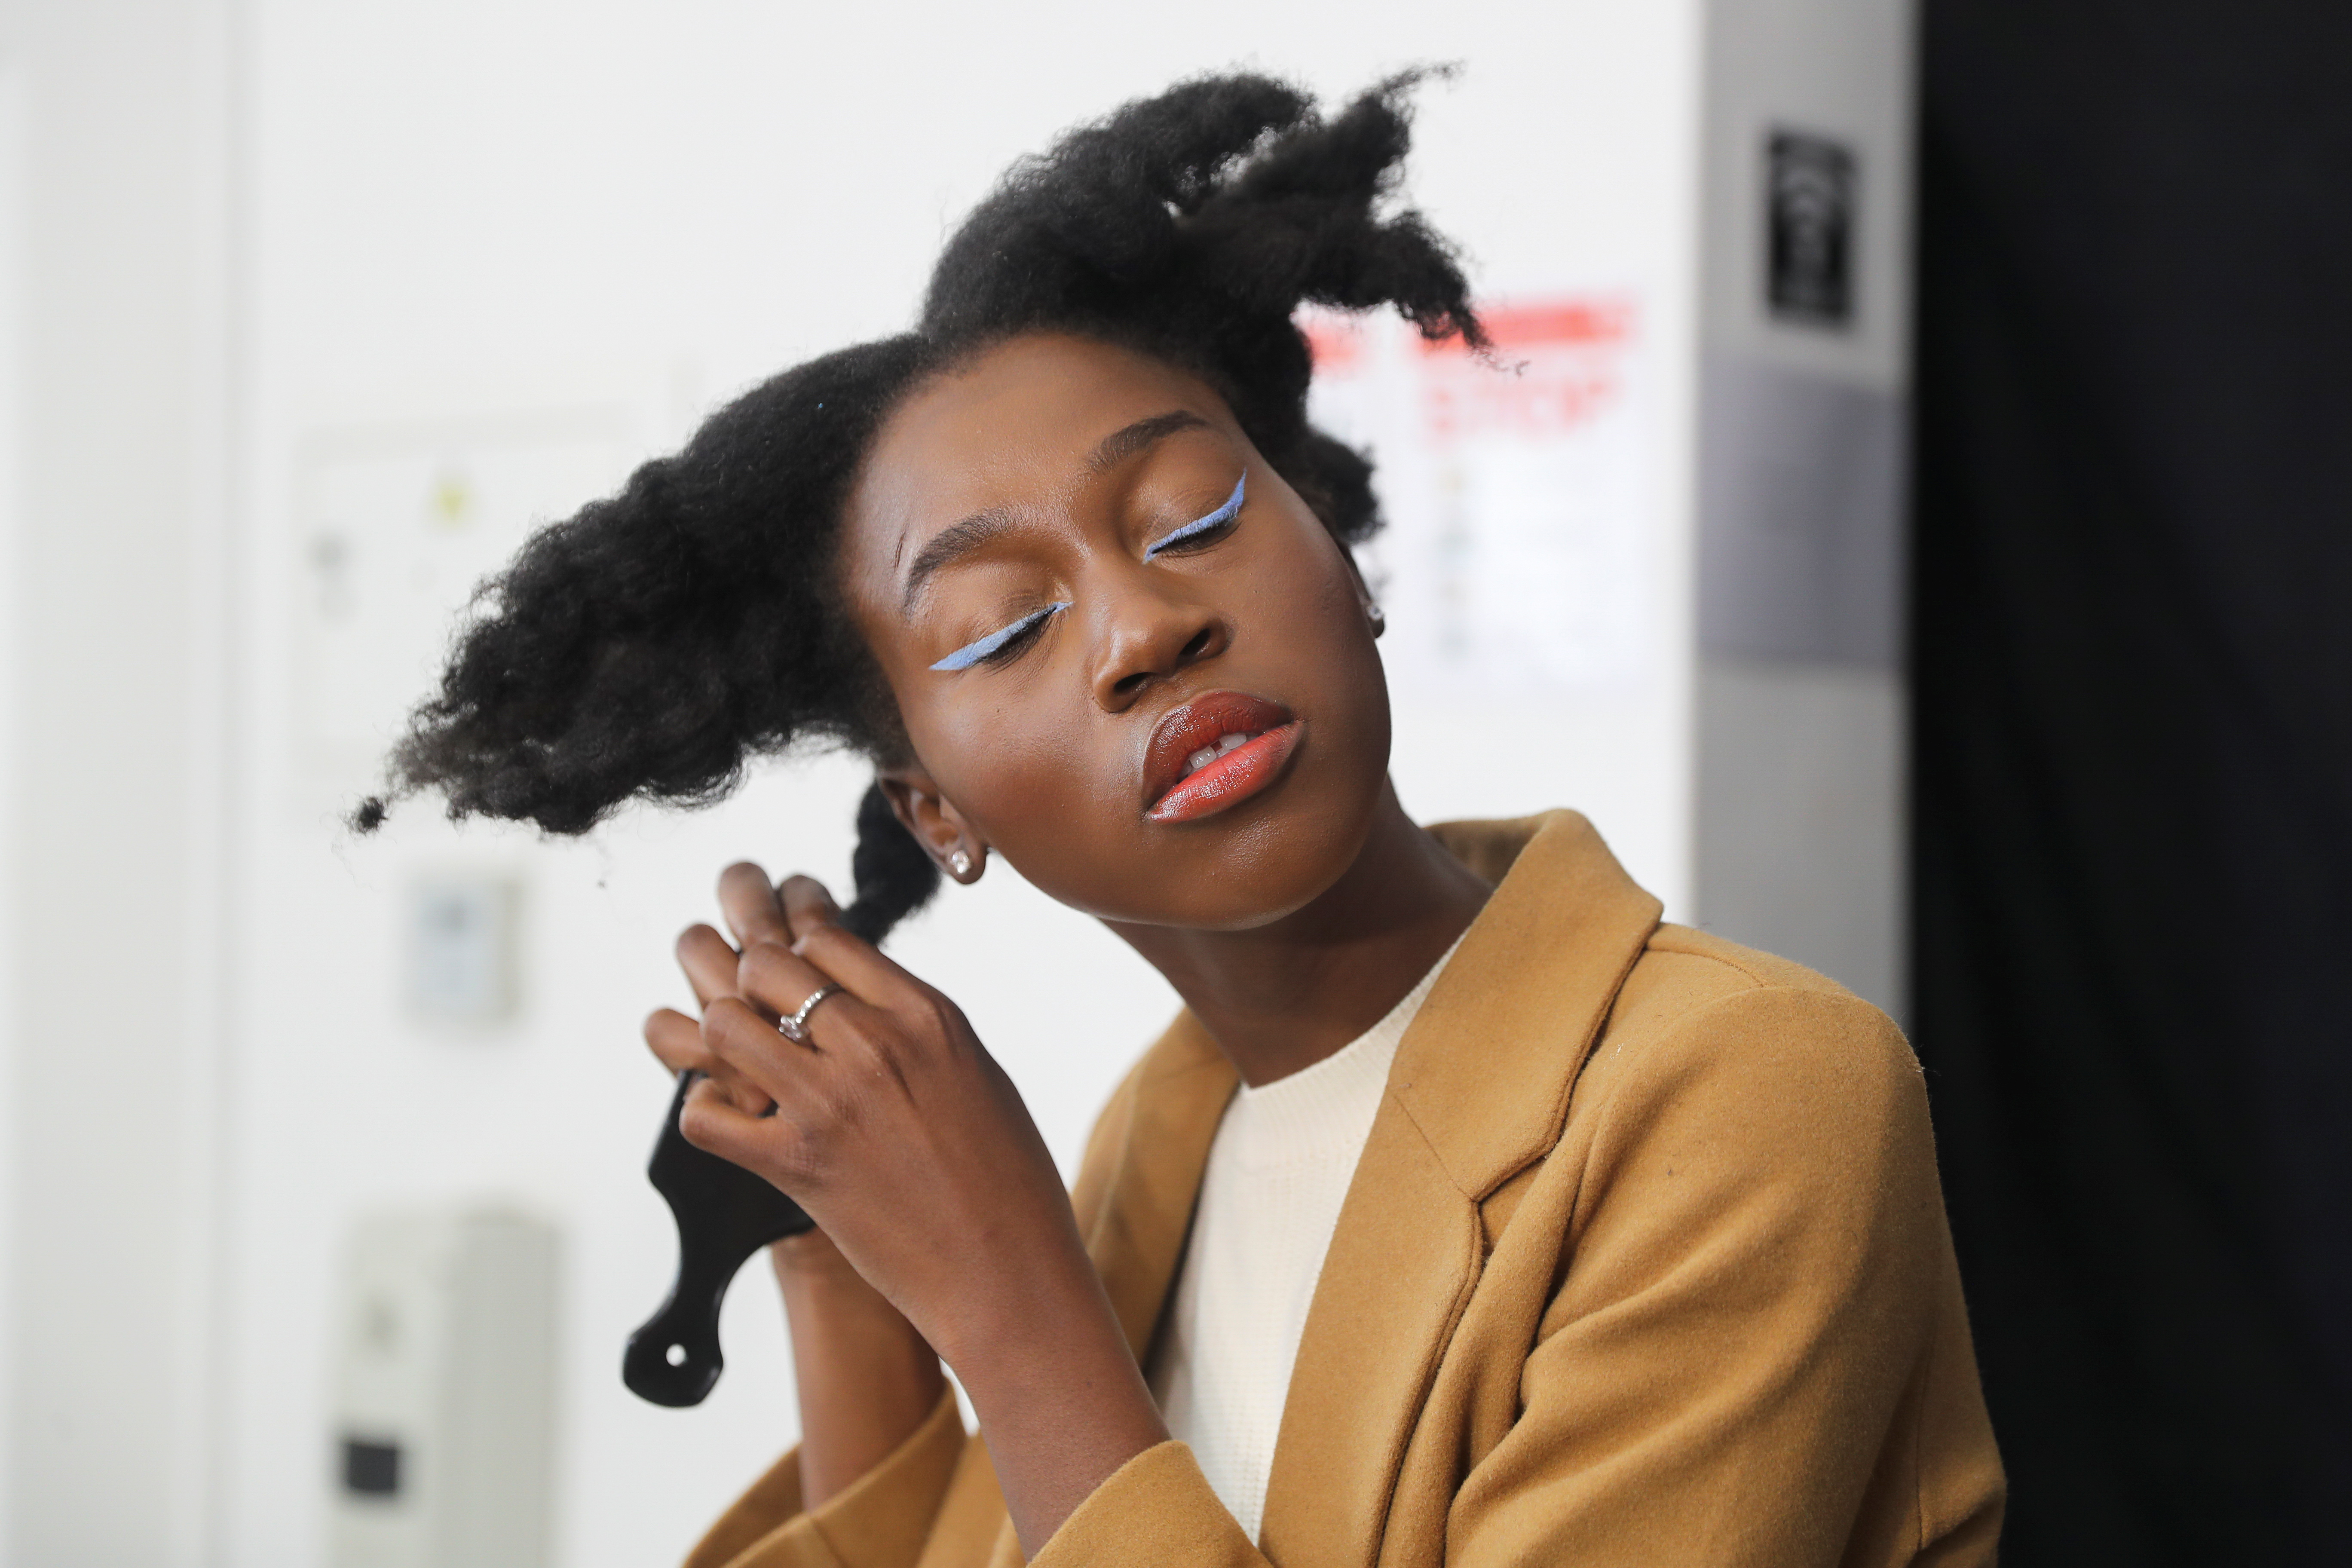 Lehlogonolo Machaba, the first openly transgender woman to compete for the Miss South Africa title combs her hair before a photo shoot in Johannesburg